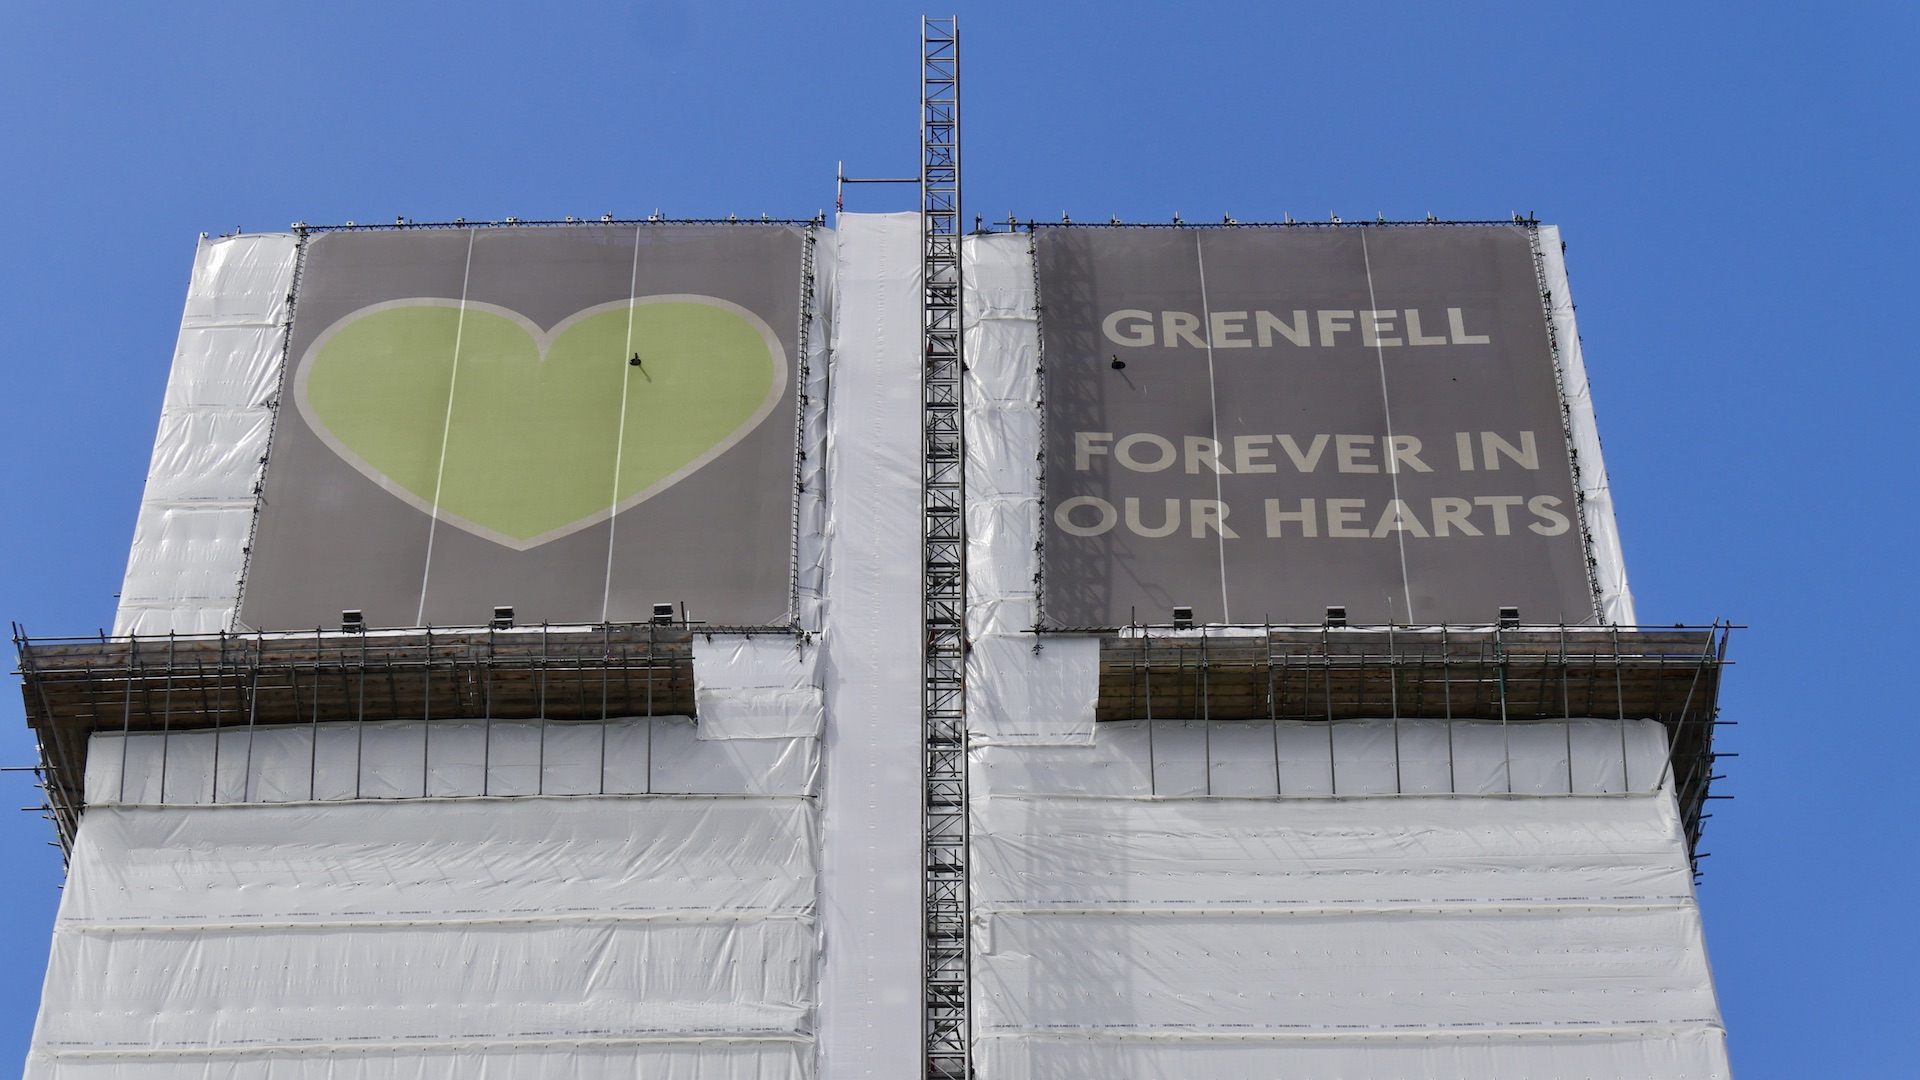 A sign saying "Grenfell forever in our hearts"